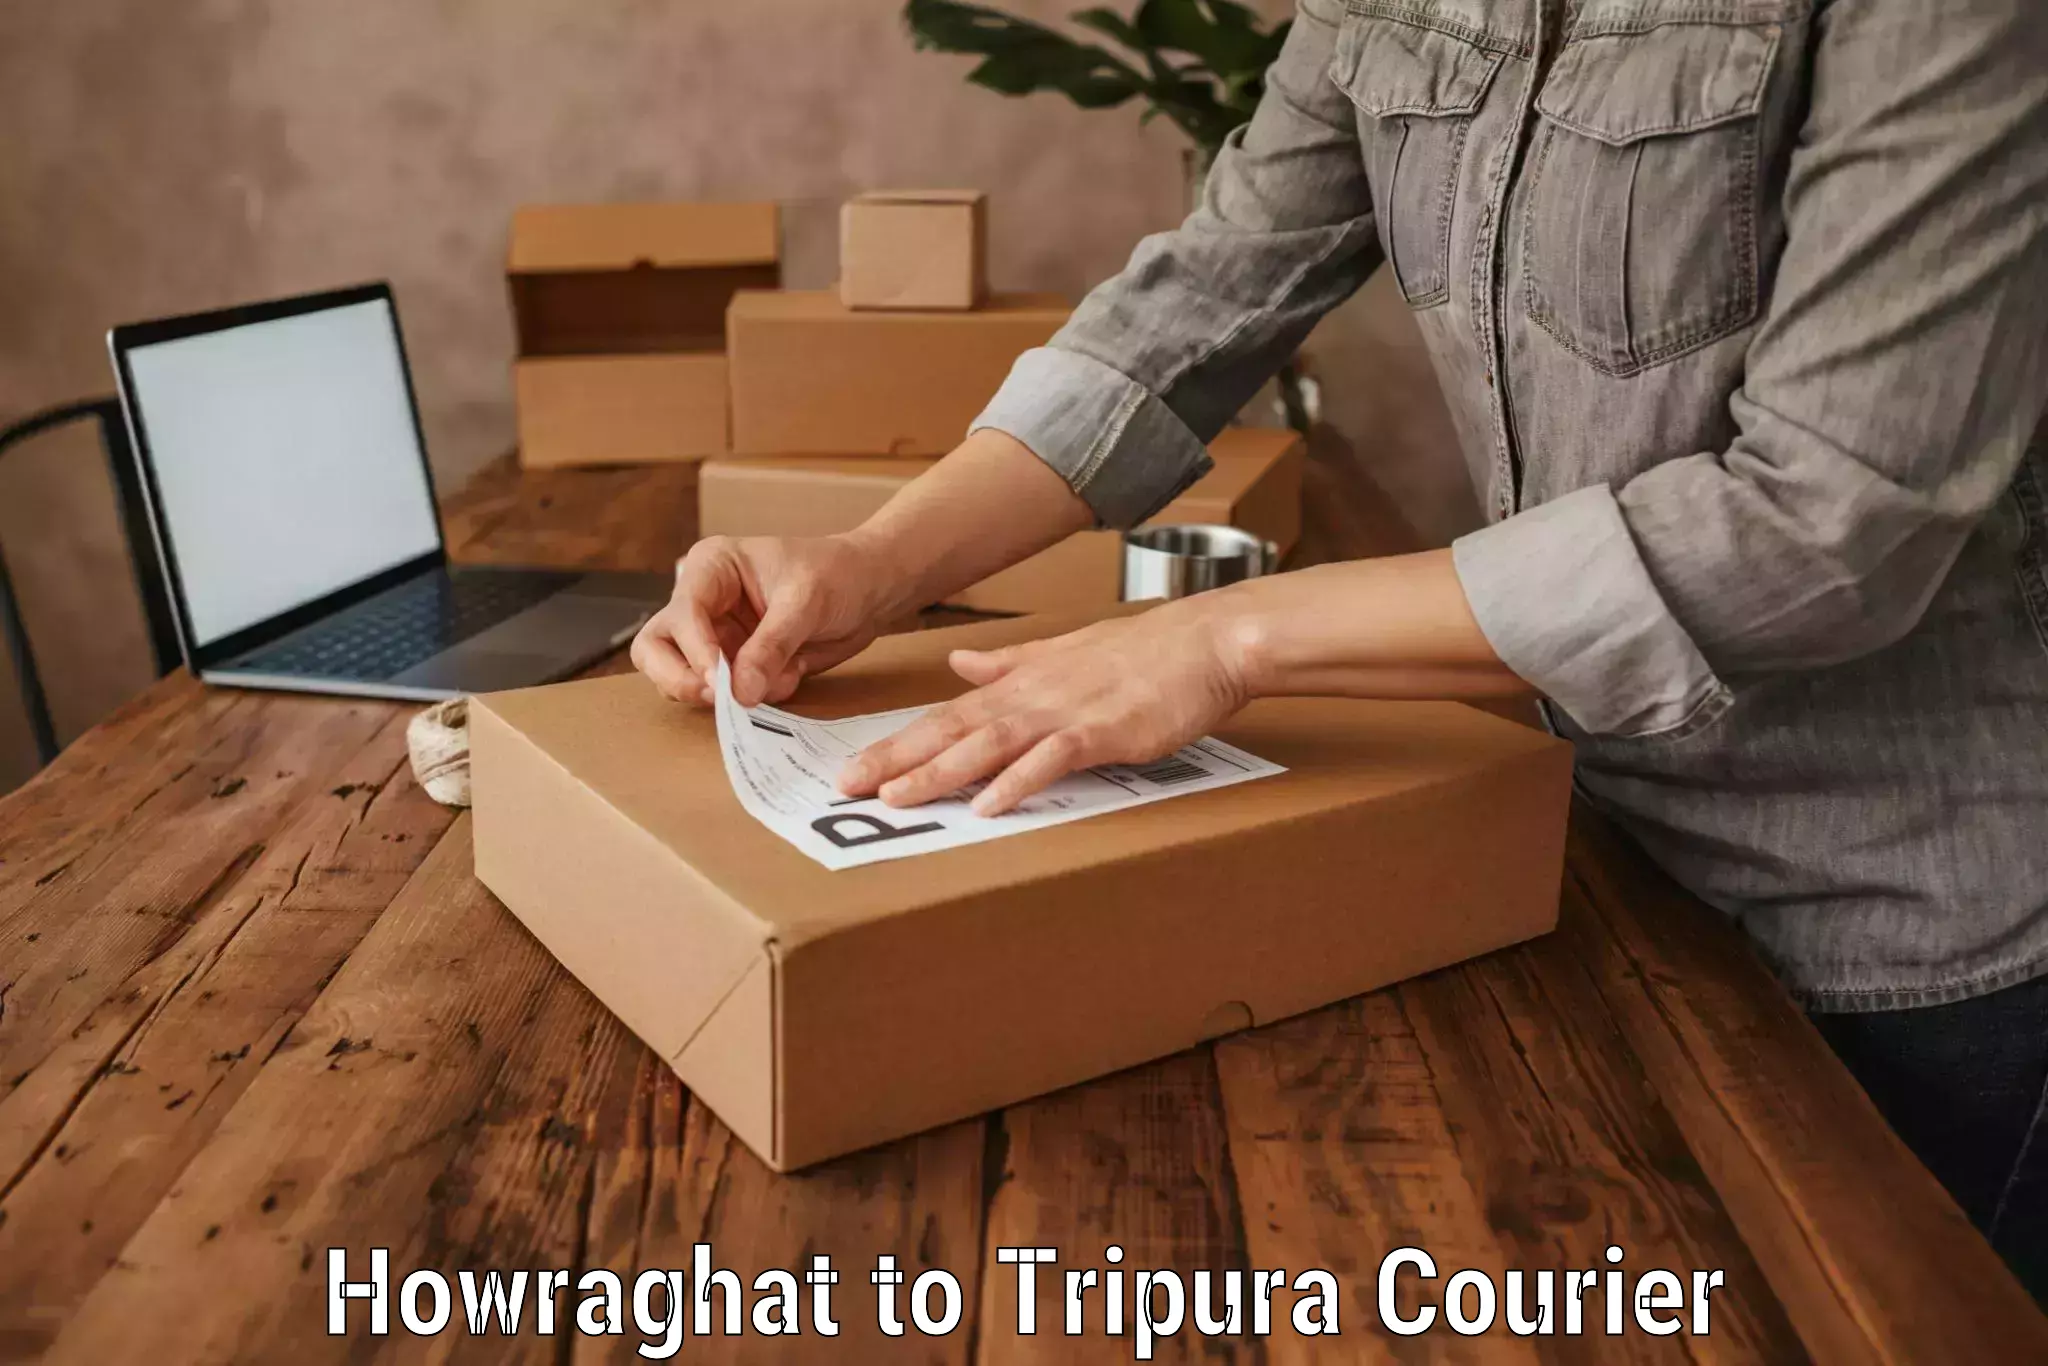 Luggage transport consulting Howraghat to Tripura